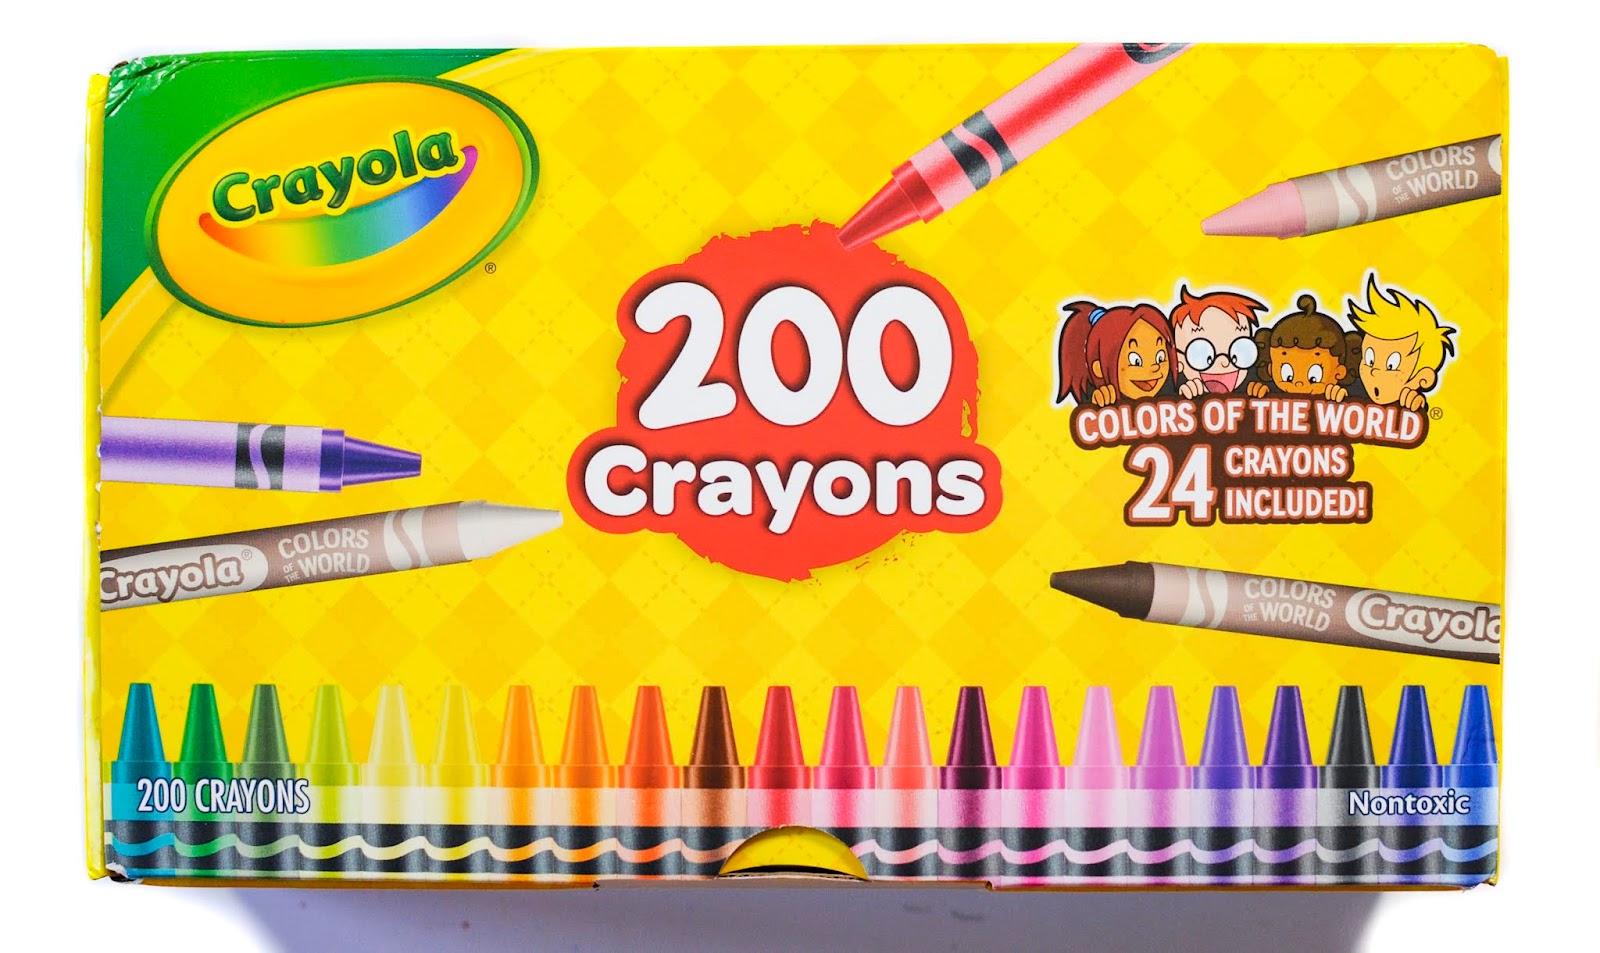 64 Count Crayola Crayons: What's Inside the Box